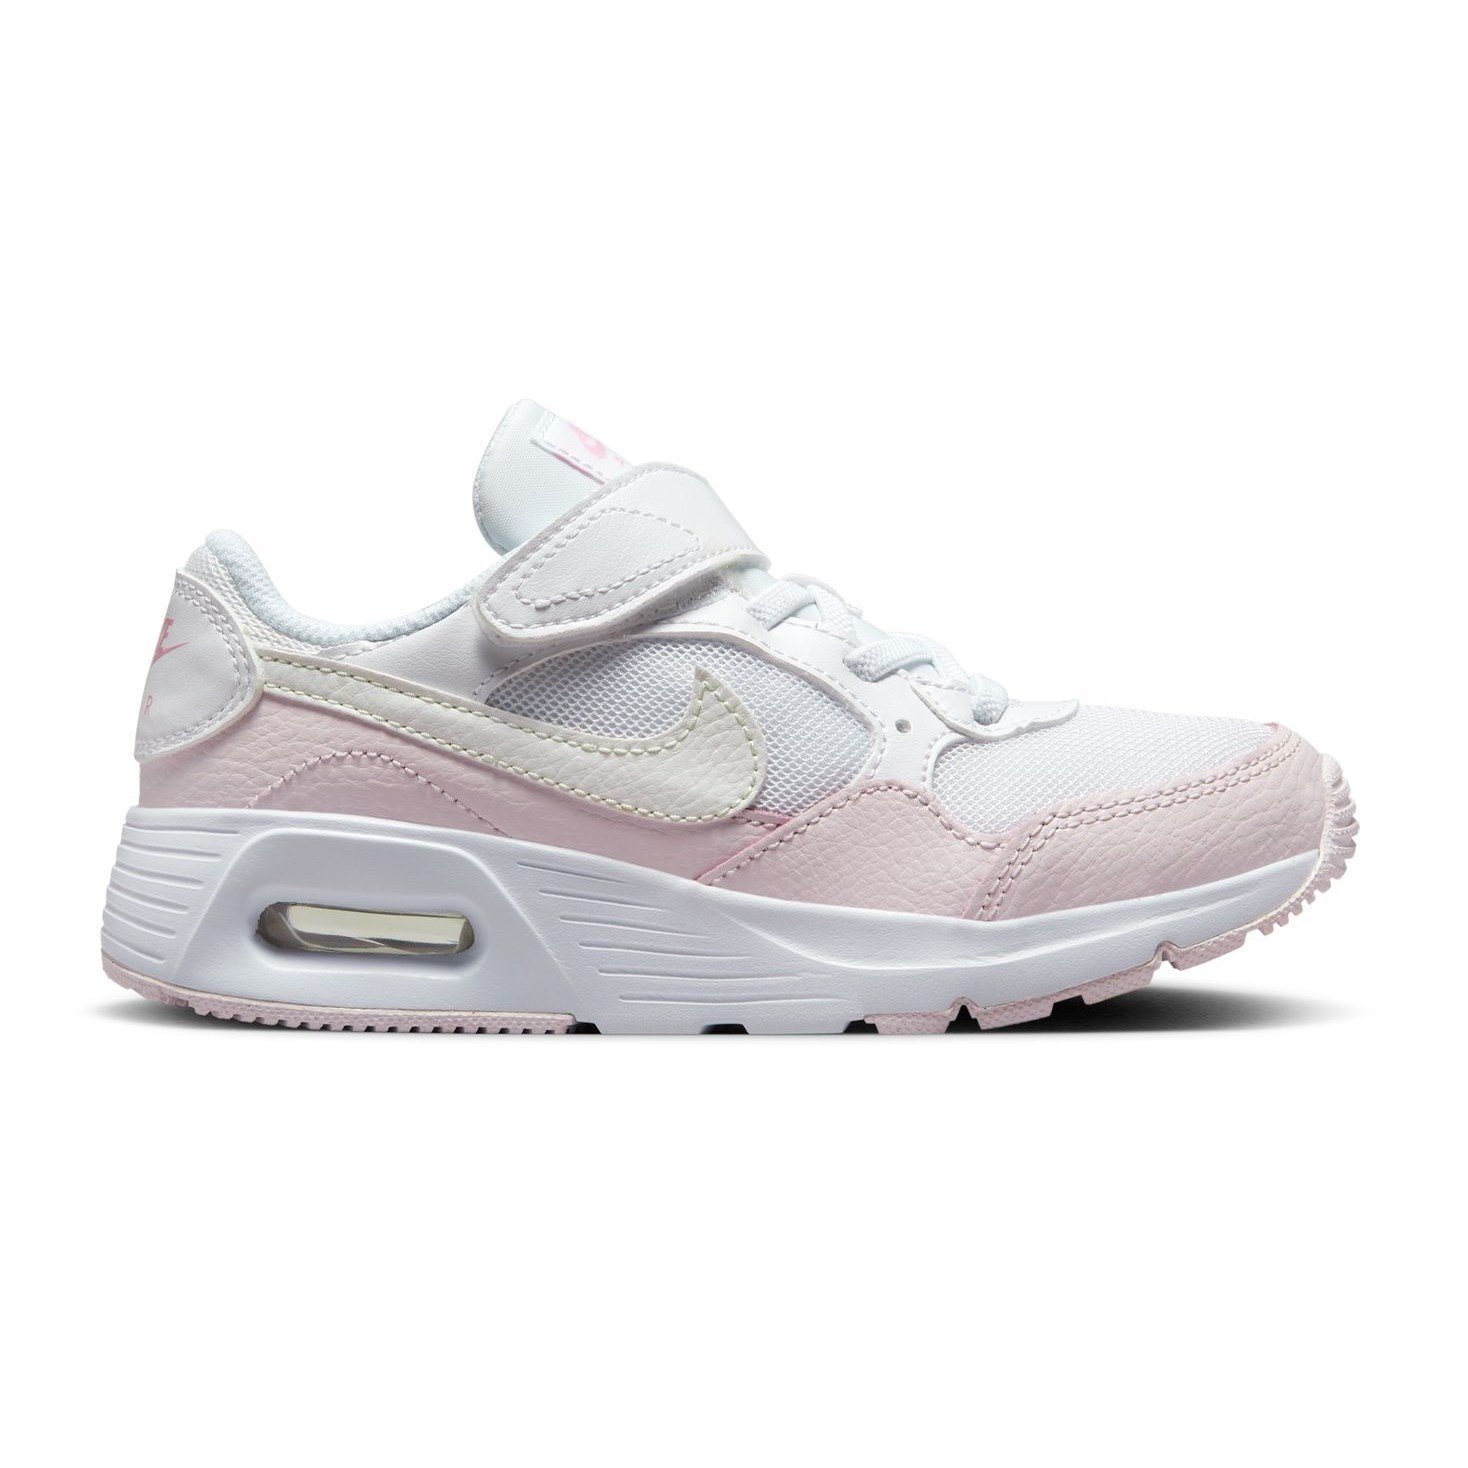 Nike Air Kids White/Summit | Sneakers - SC PS - Pink Max Sportitude White/Pearl